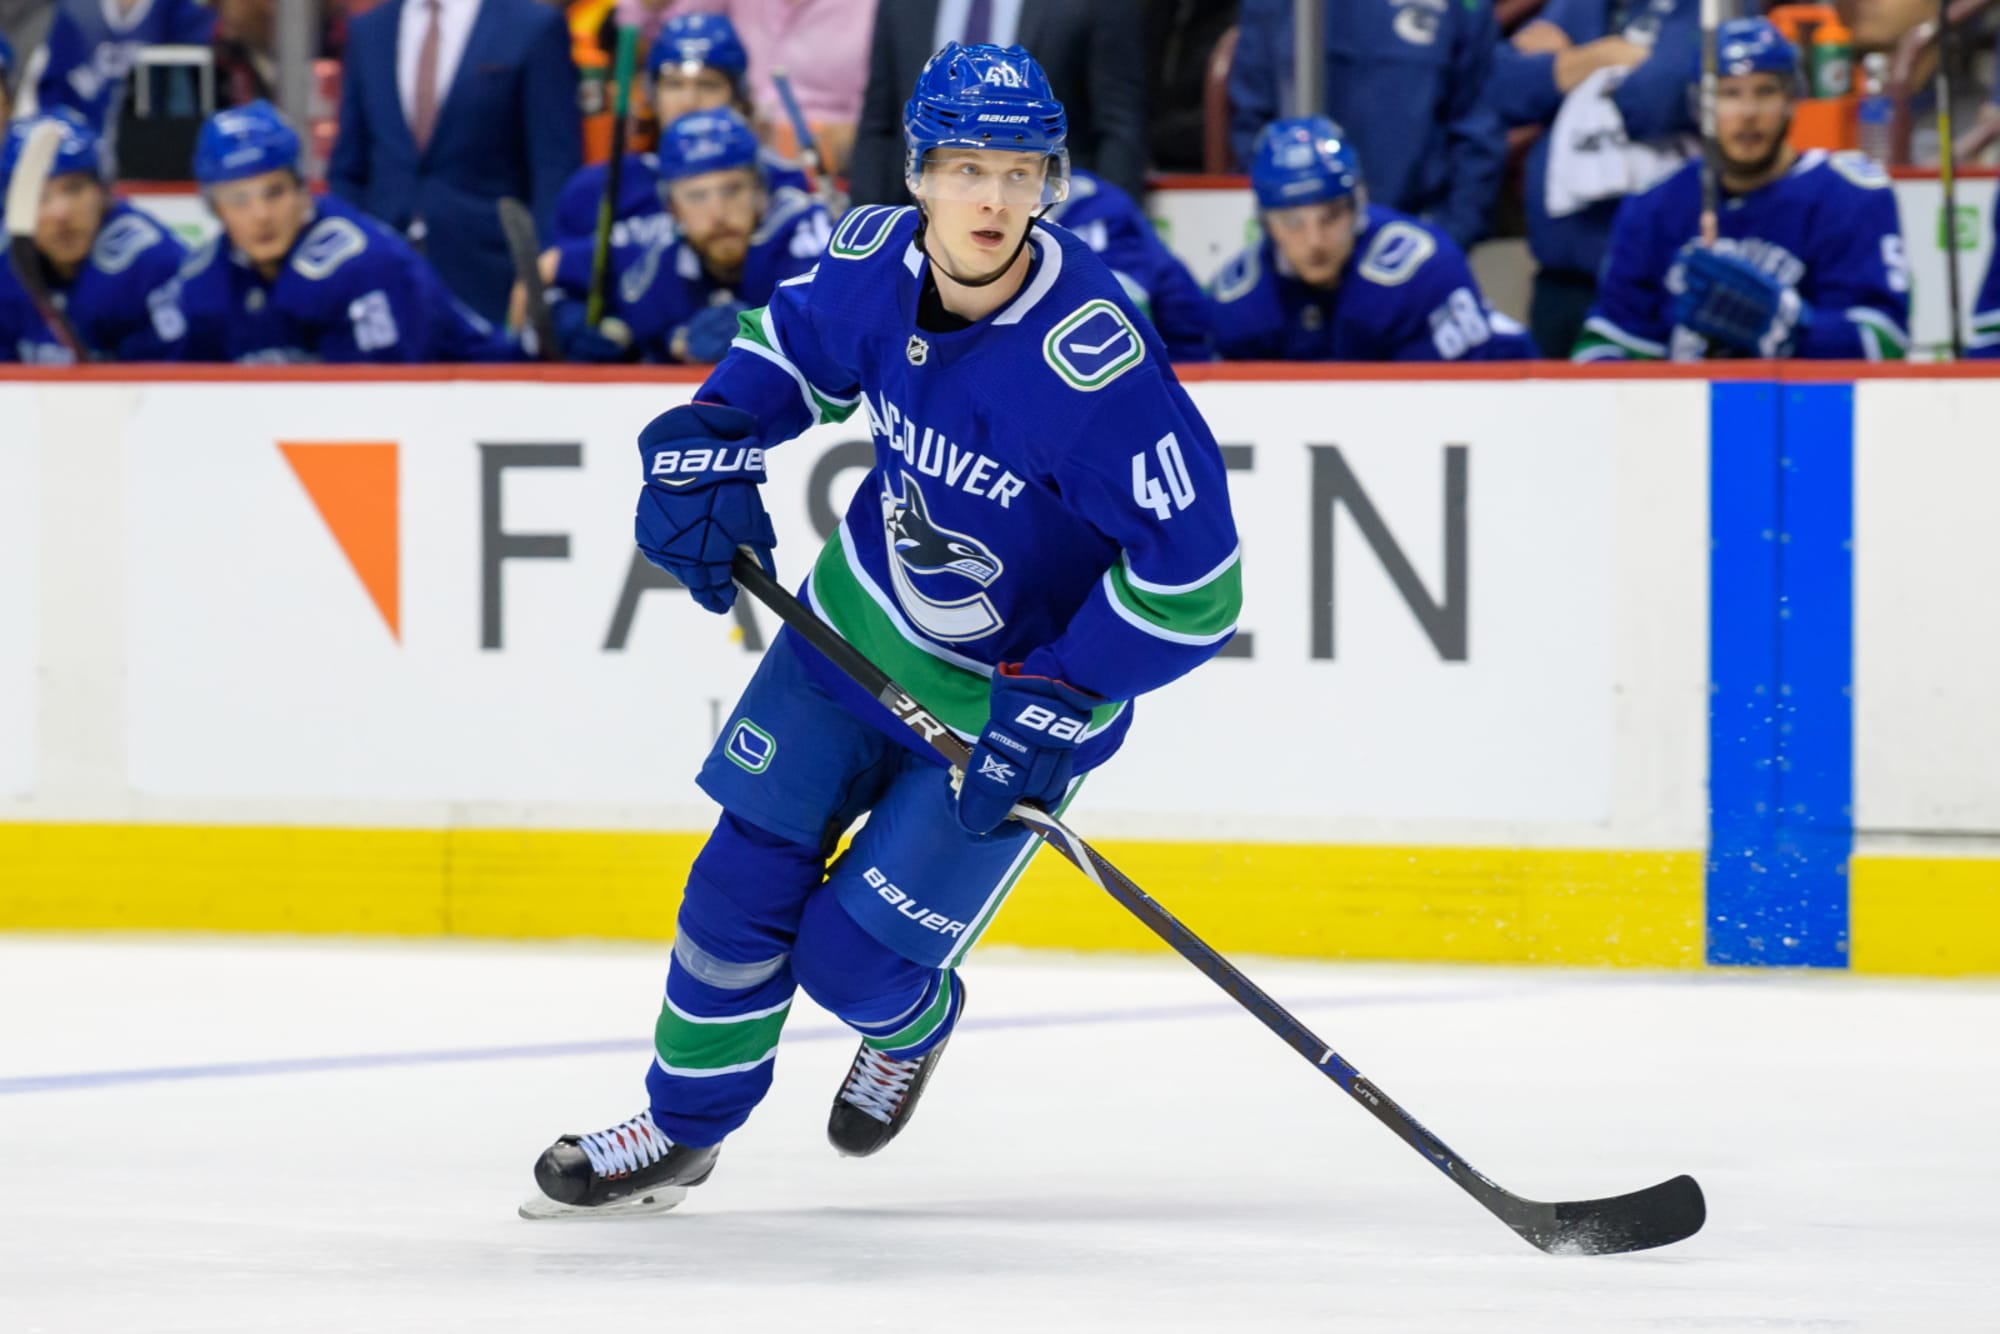 Canucks 5, Blue Jackets 2: Fired up Elias Pettersson helps outpace